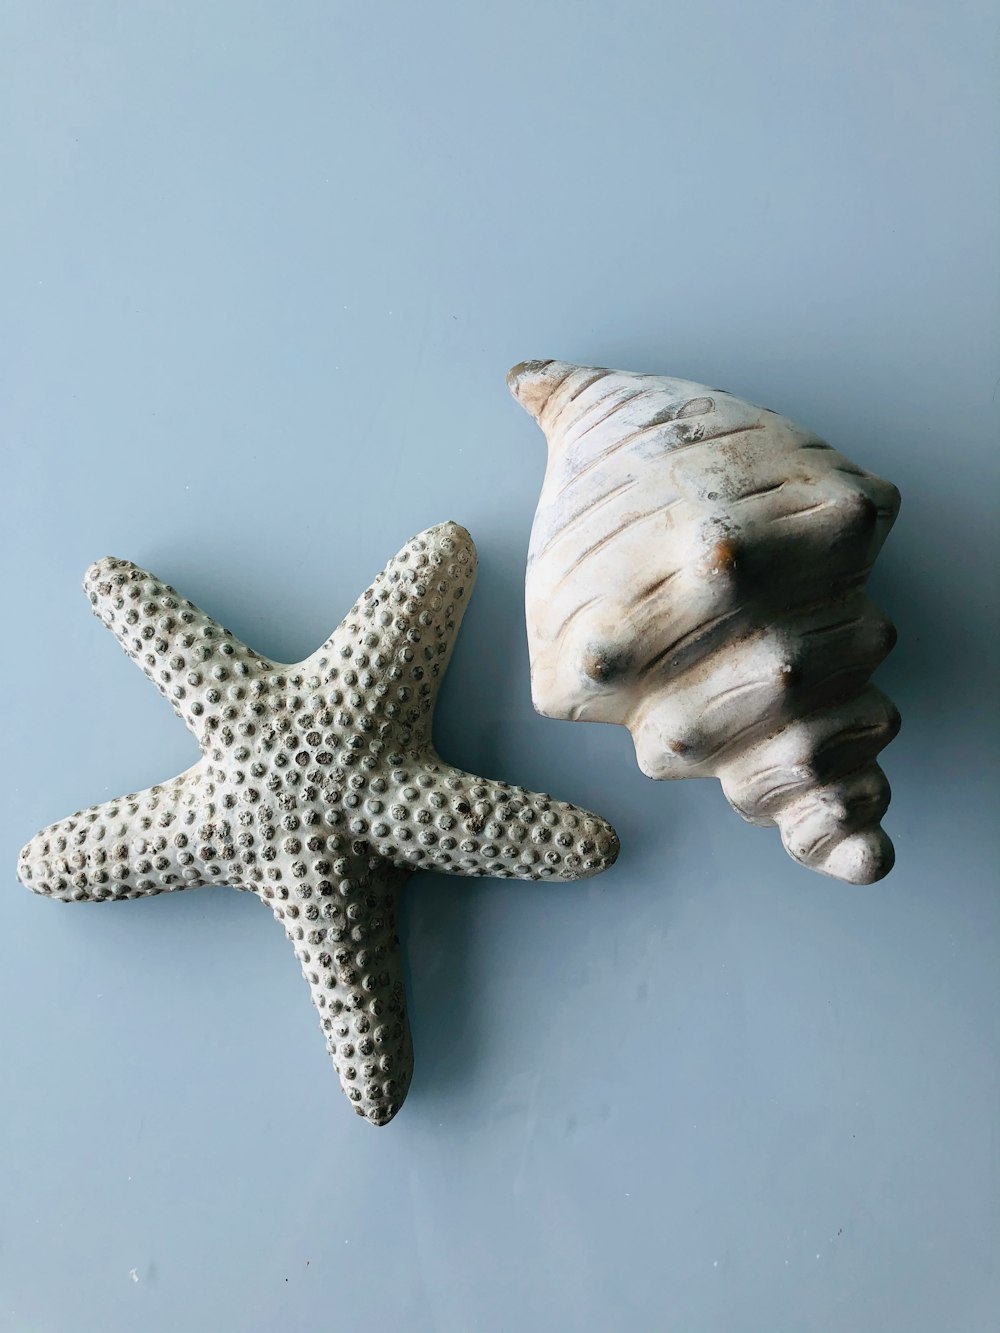 white and brown starfish on white surface